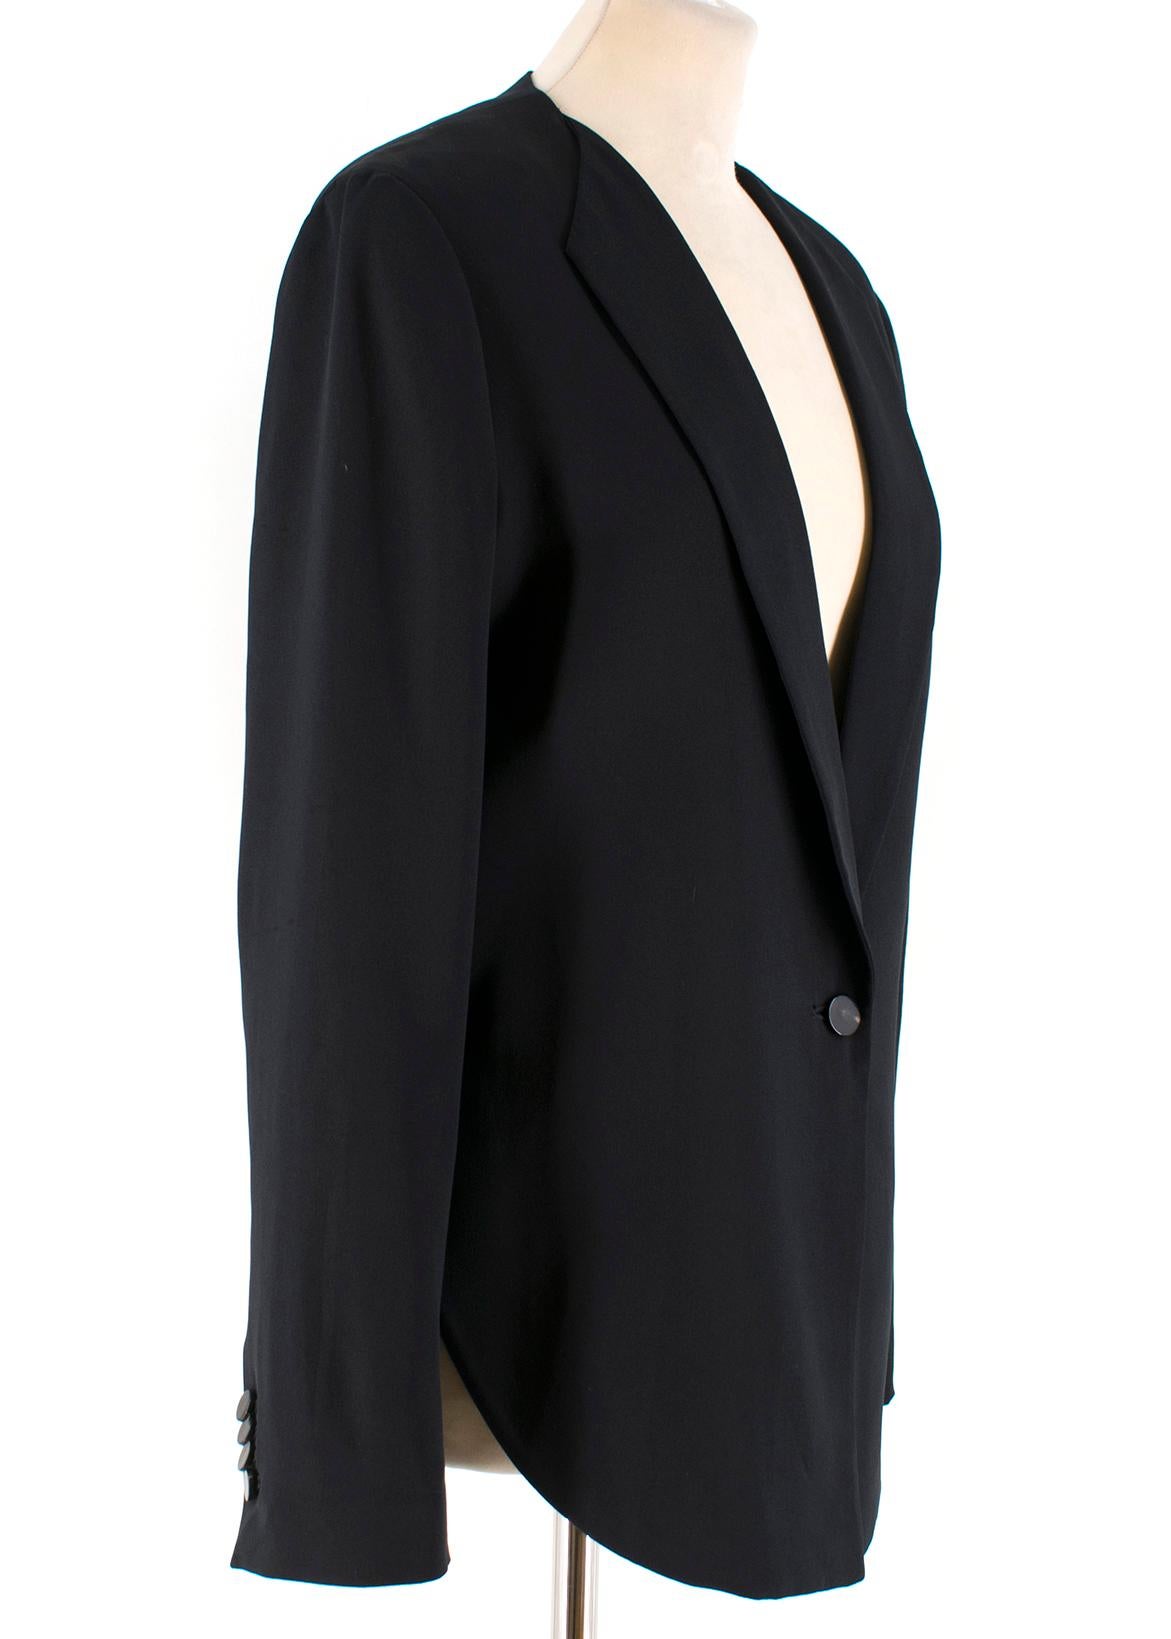 Phillip Lim cropped-back silk-faille jacket 

- Black, lightweight silk-faille 
- Collarless, notch lapel
Long sleeves, lightly padded shoulders, button-fastening cuffs 
- Cropped back, tail front design
- Single chest welt pocket 
- Single breasted